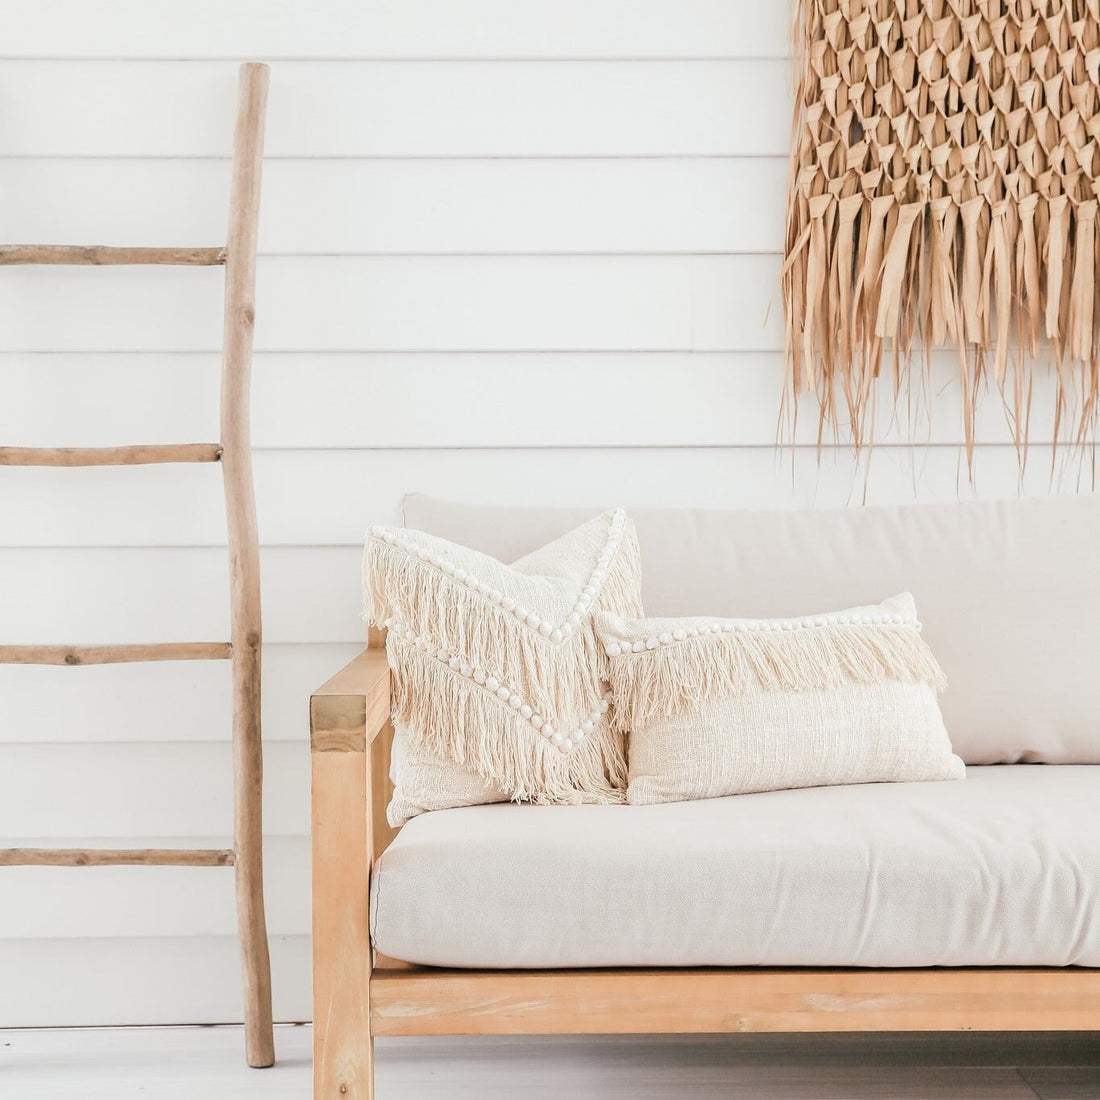 Creating Everyday Summer Vibes: Make Your Home Feel Like a Tropical Coastal Holiday